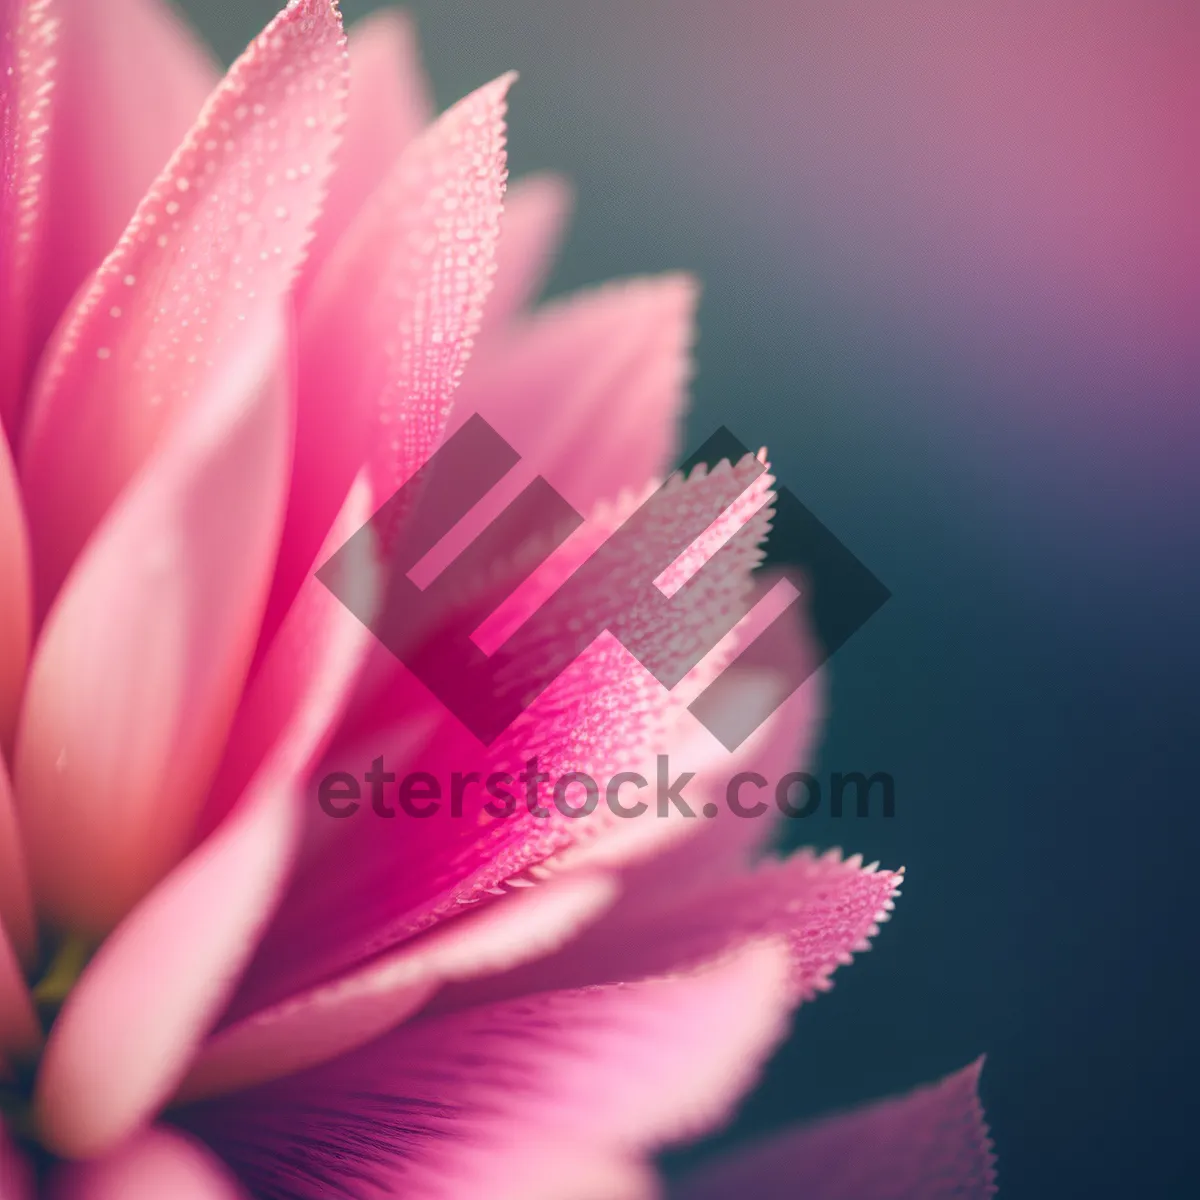 Picture of Blooming Pink Floral Petals in Garden